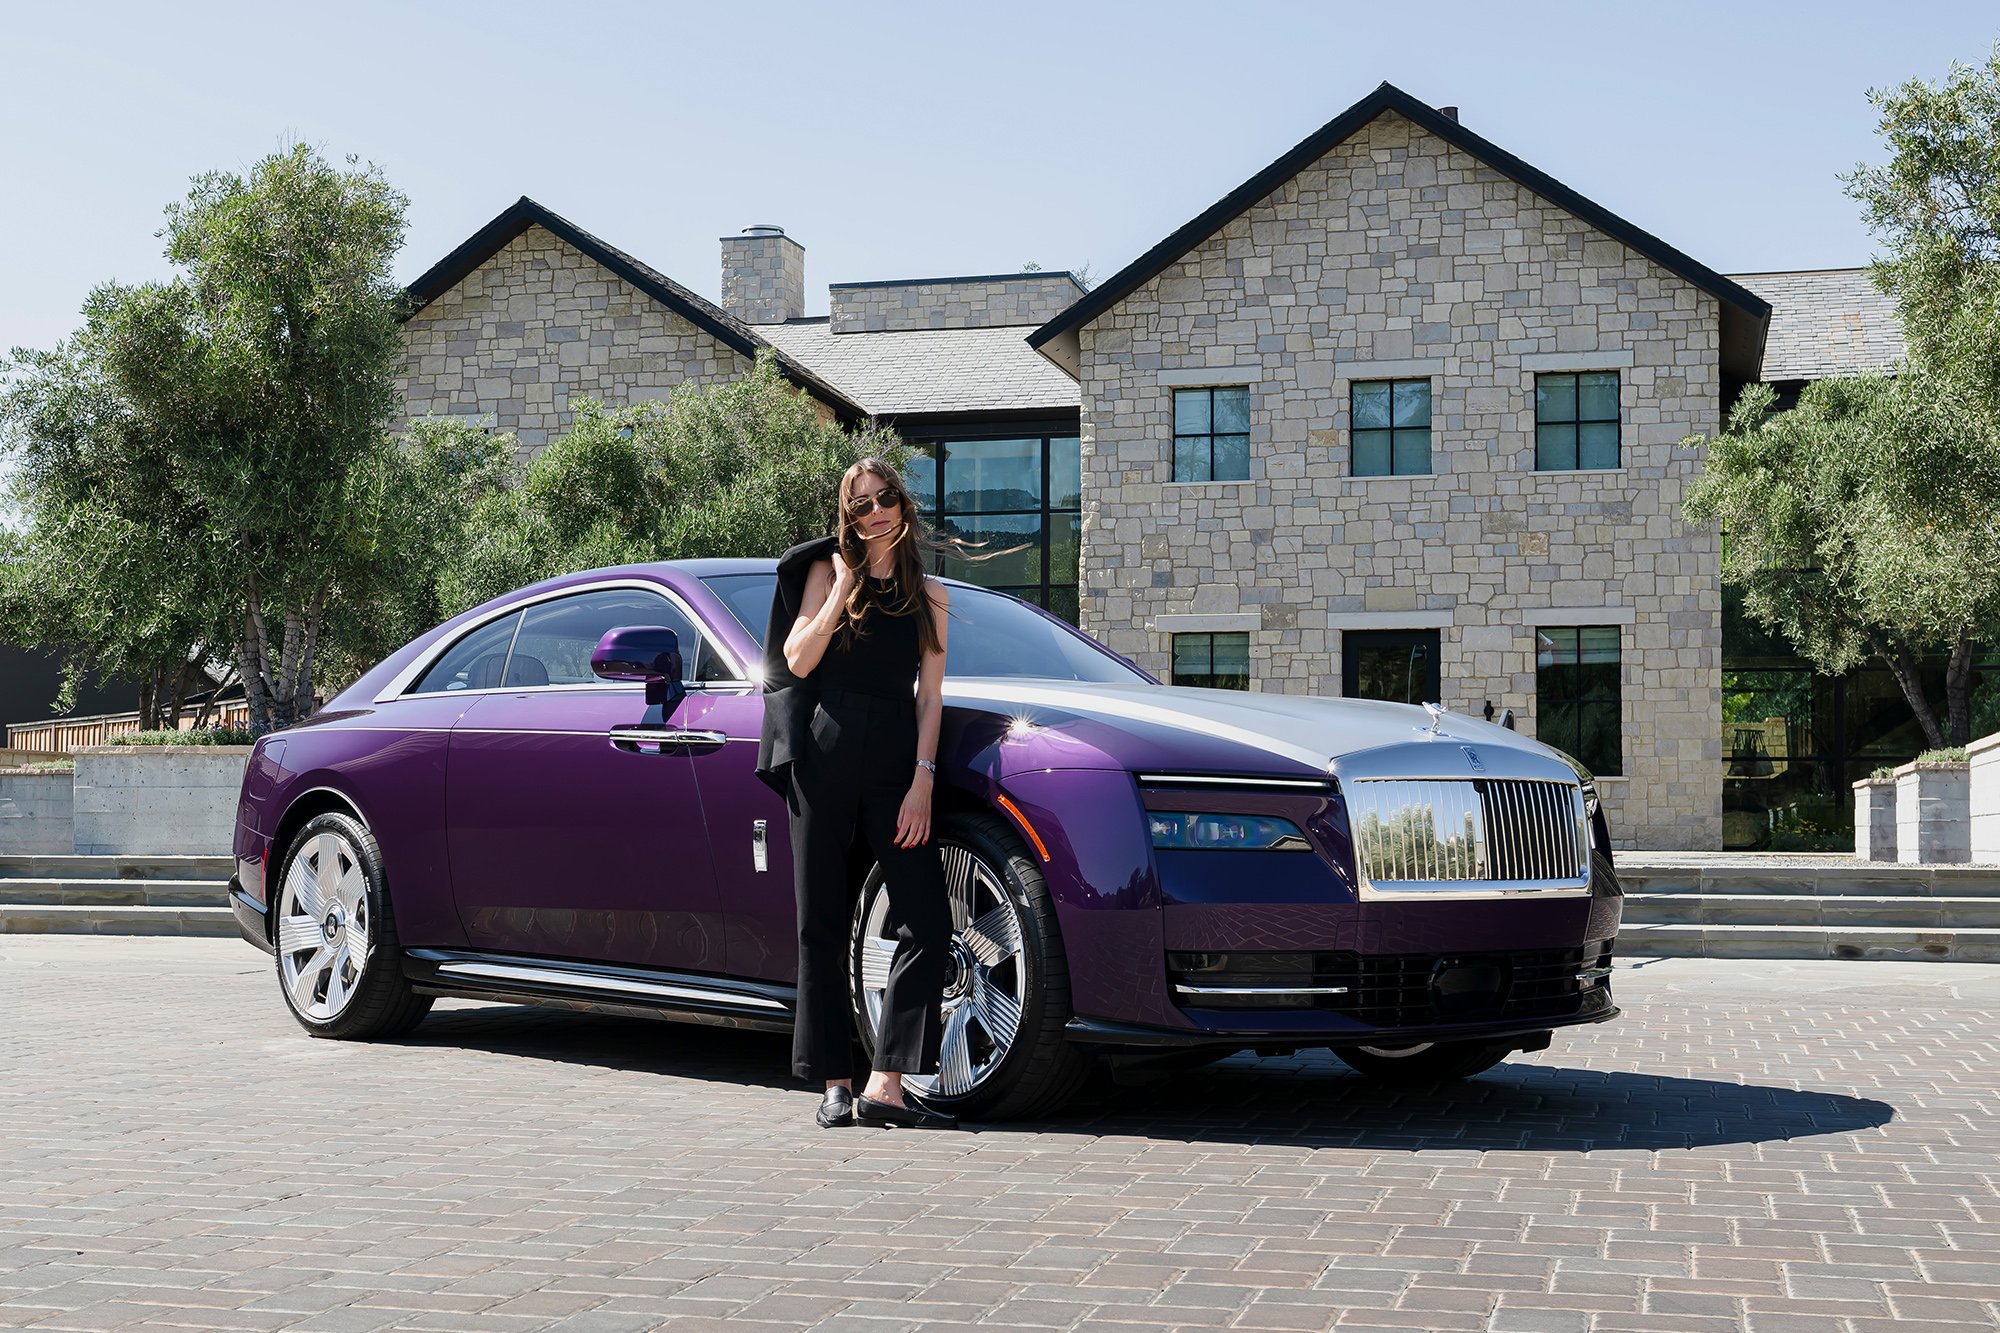 Britta Reineke, founder of ellectric standing next to the all-electric Rolls-Royce Spectre